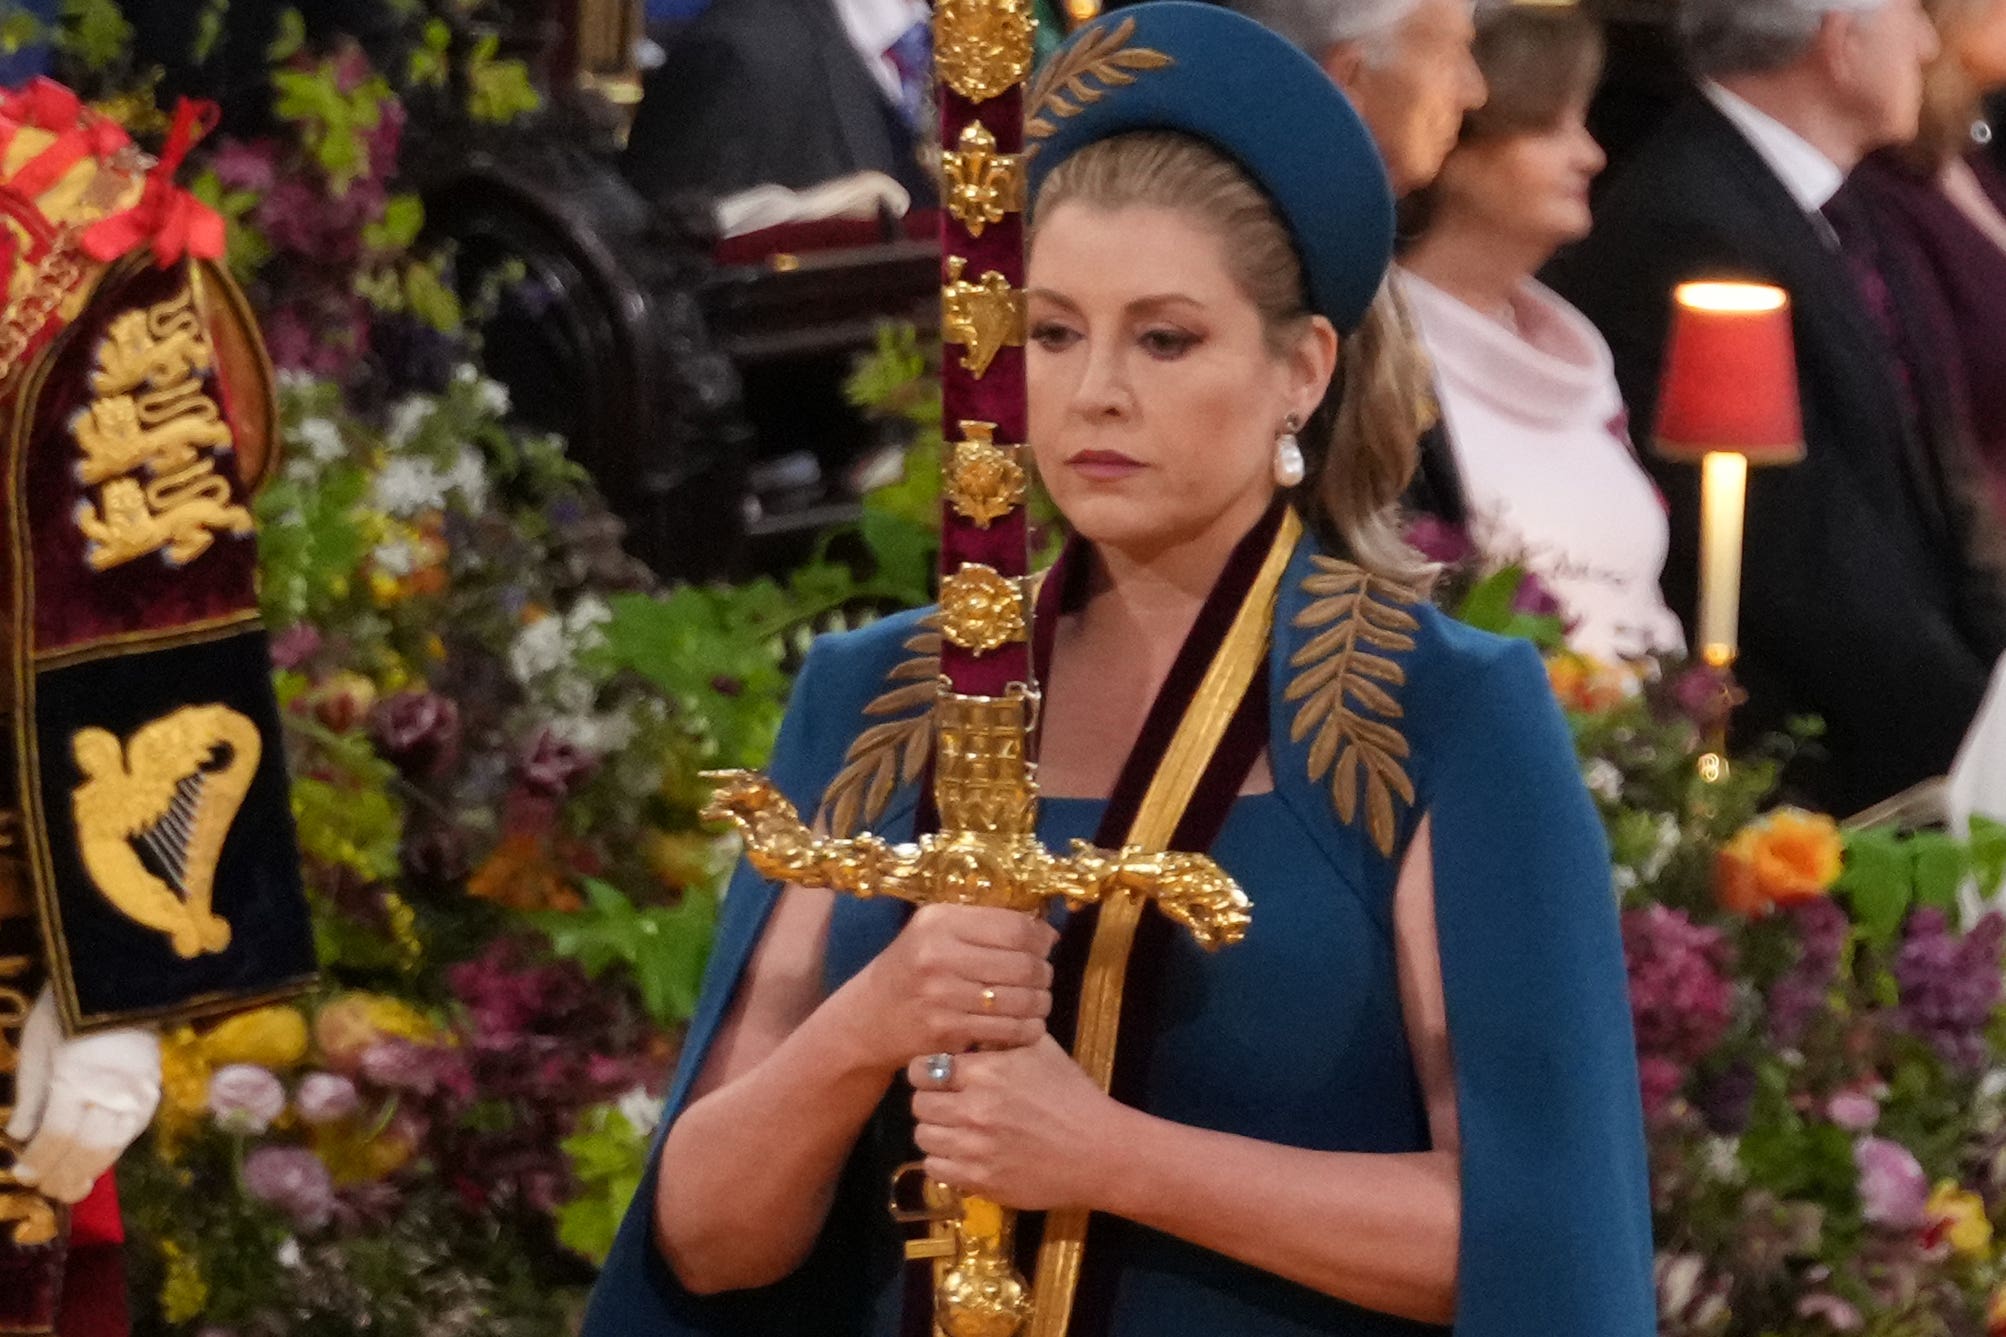 Penny Mordaunt carrying the sword of state at the coronation of King Charles III in May 2023